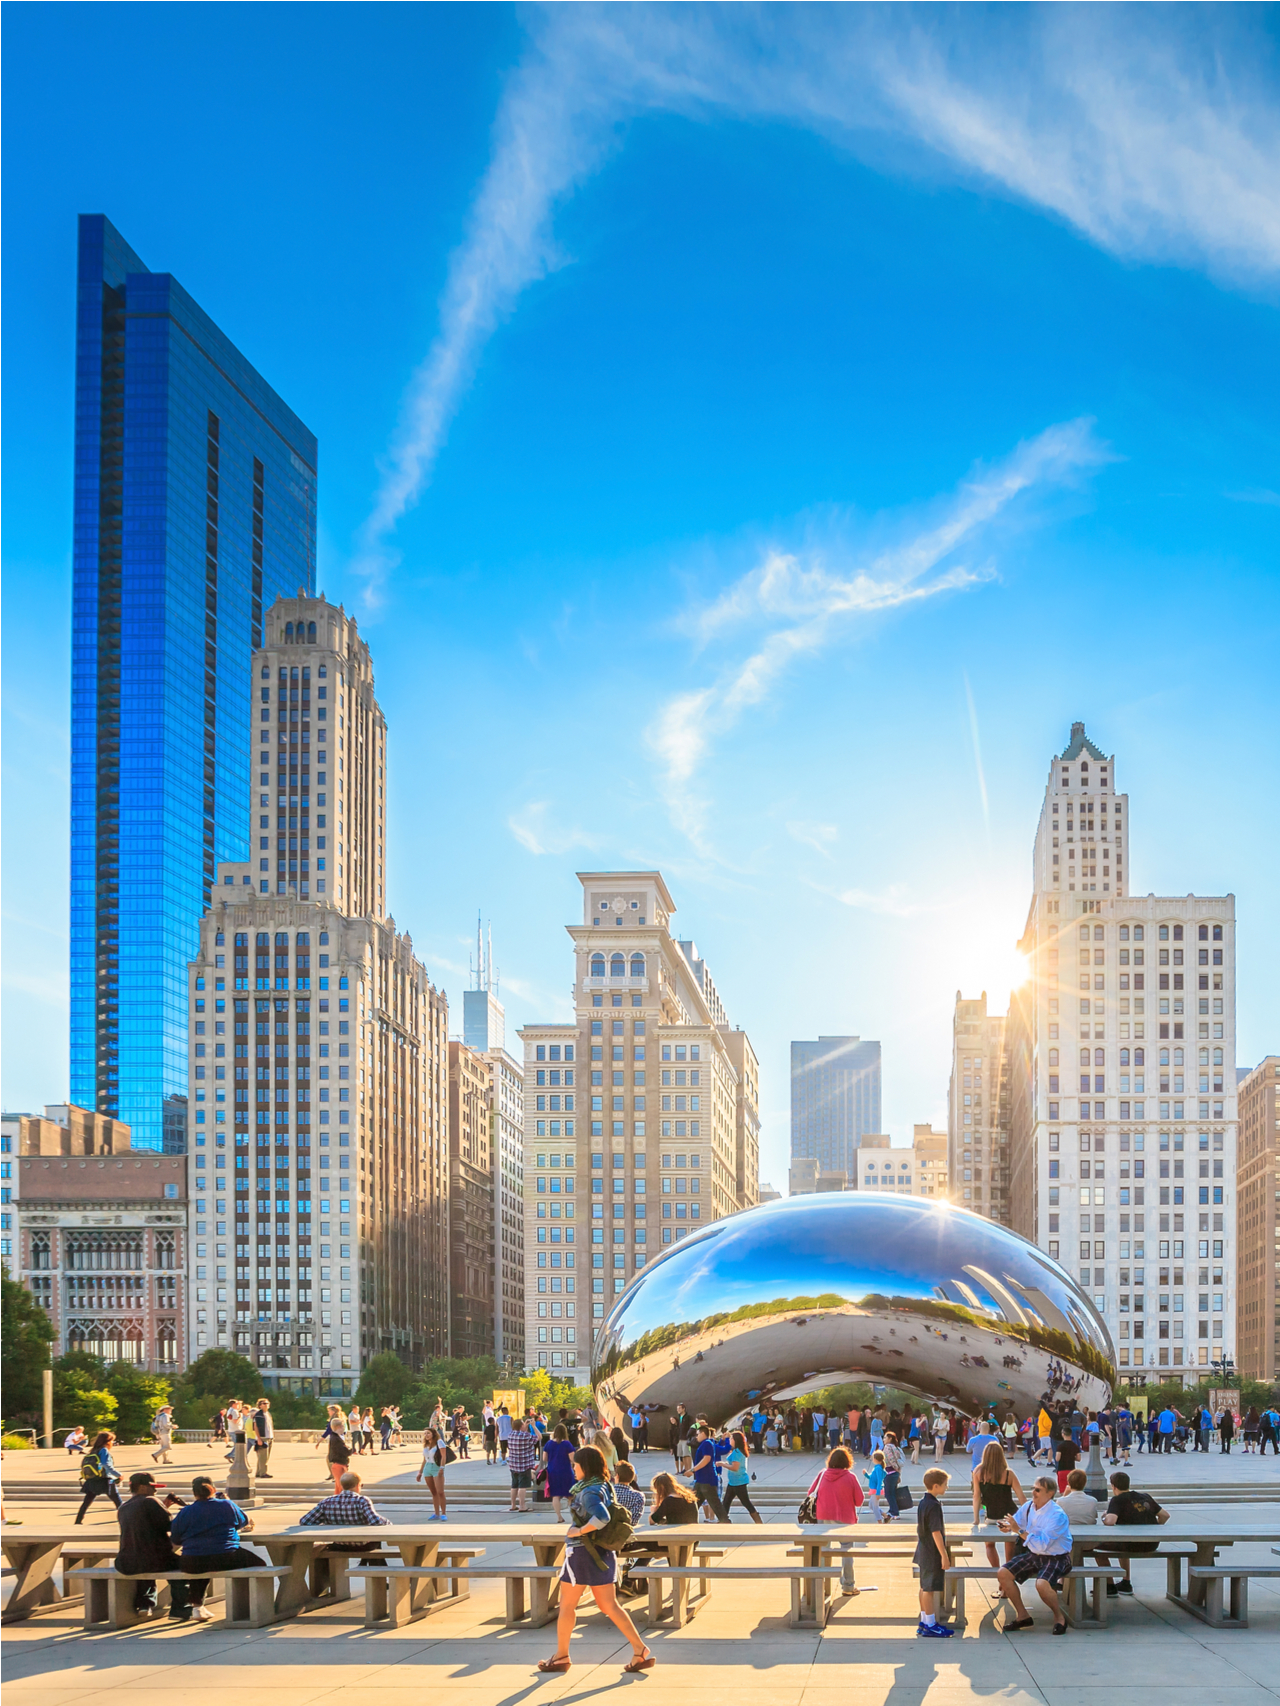 19 Best Things to Do in Chicago in 2022